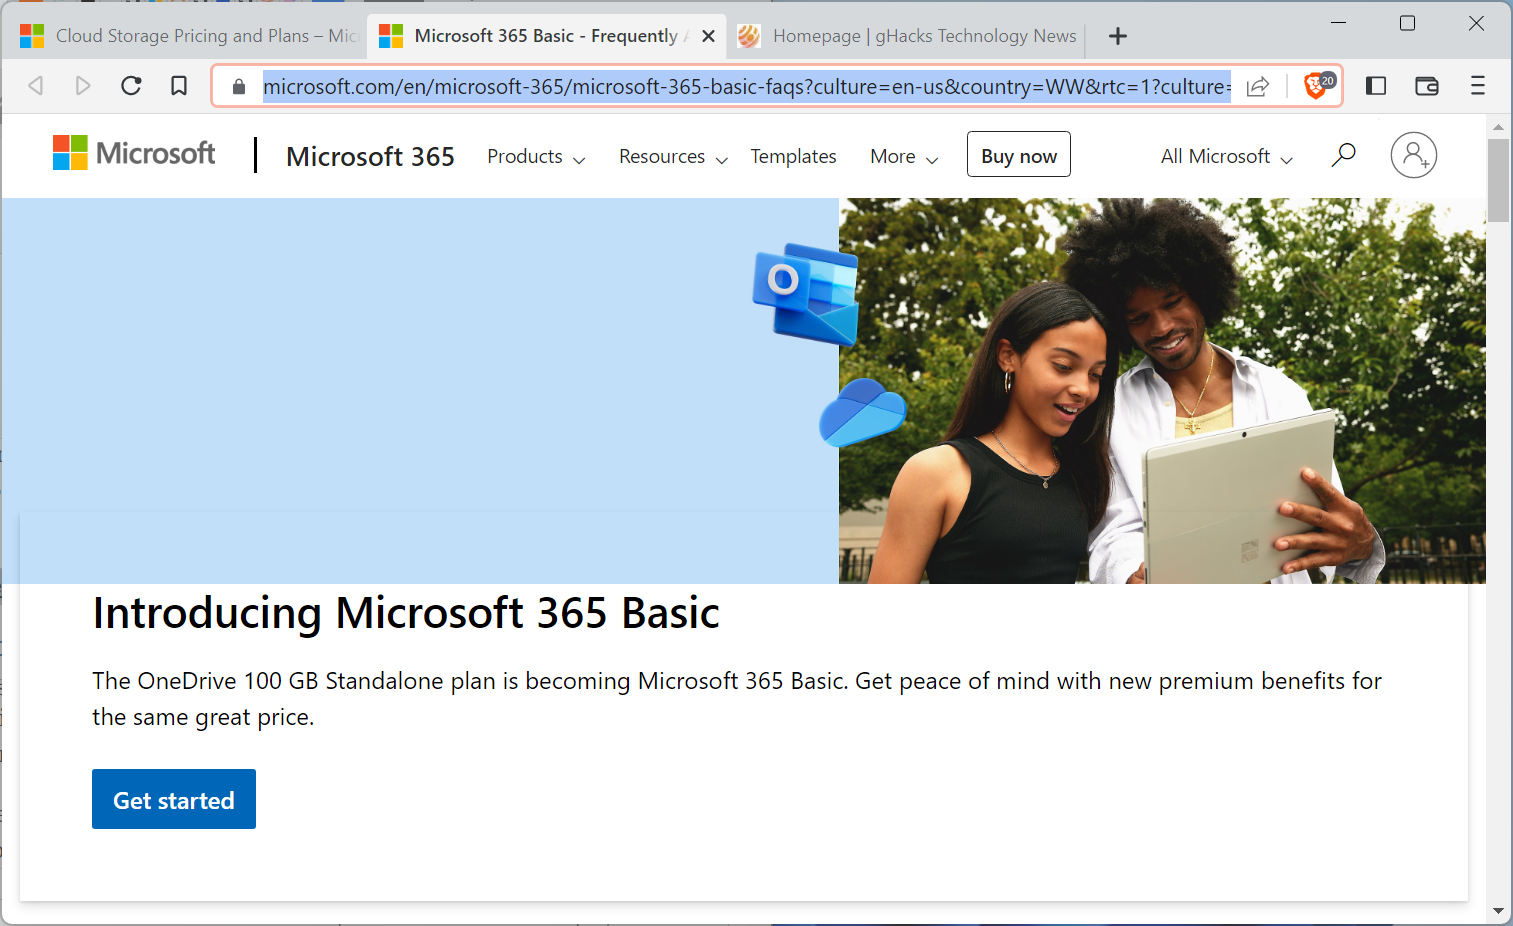 Microsoft 365 Basic: here is what we know about the new plan